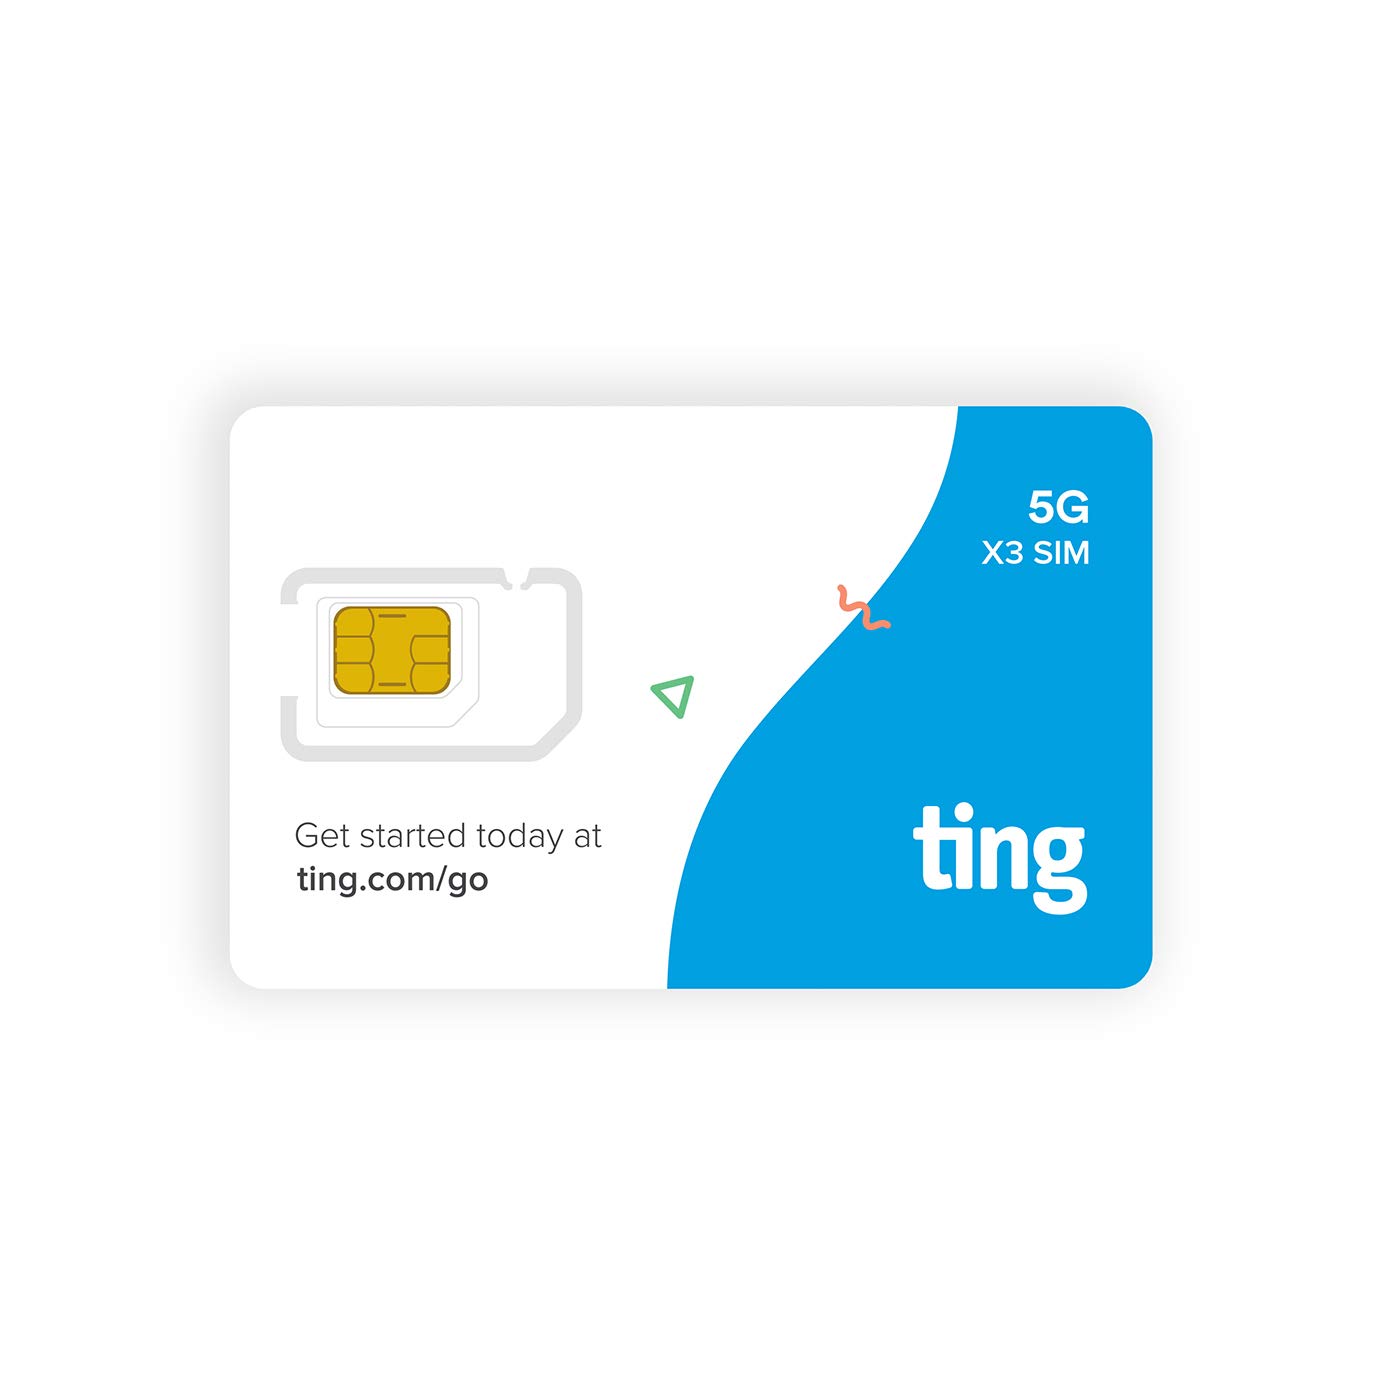 Ting Mobile Sim Card kit for Unlocked Phones - Bring Your own Compatible Phones - Unlimited Talk & Text Plan Starts at $10/Month